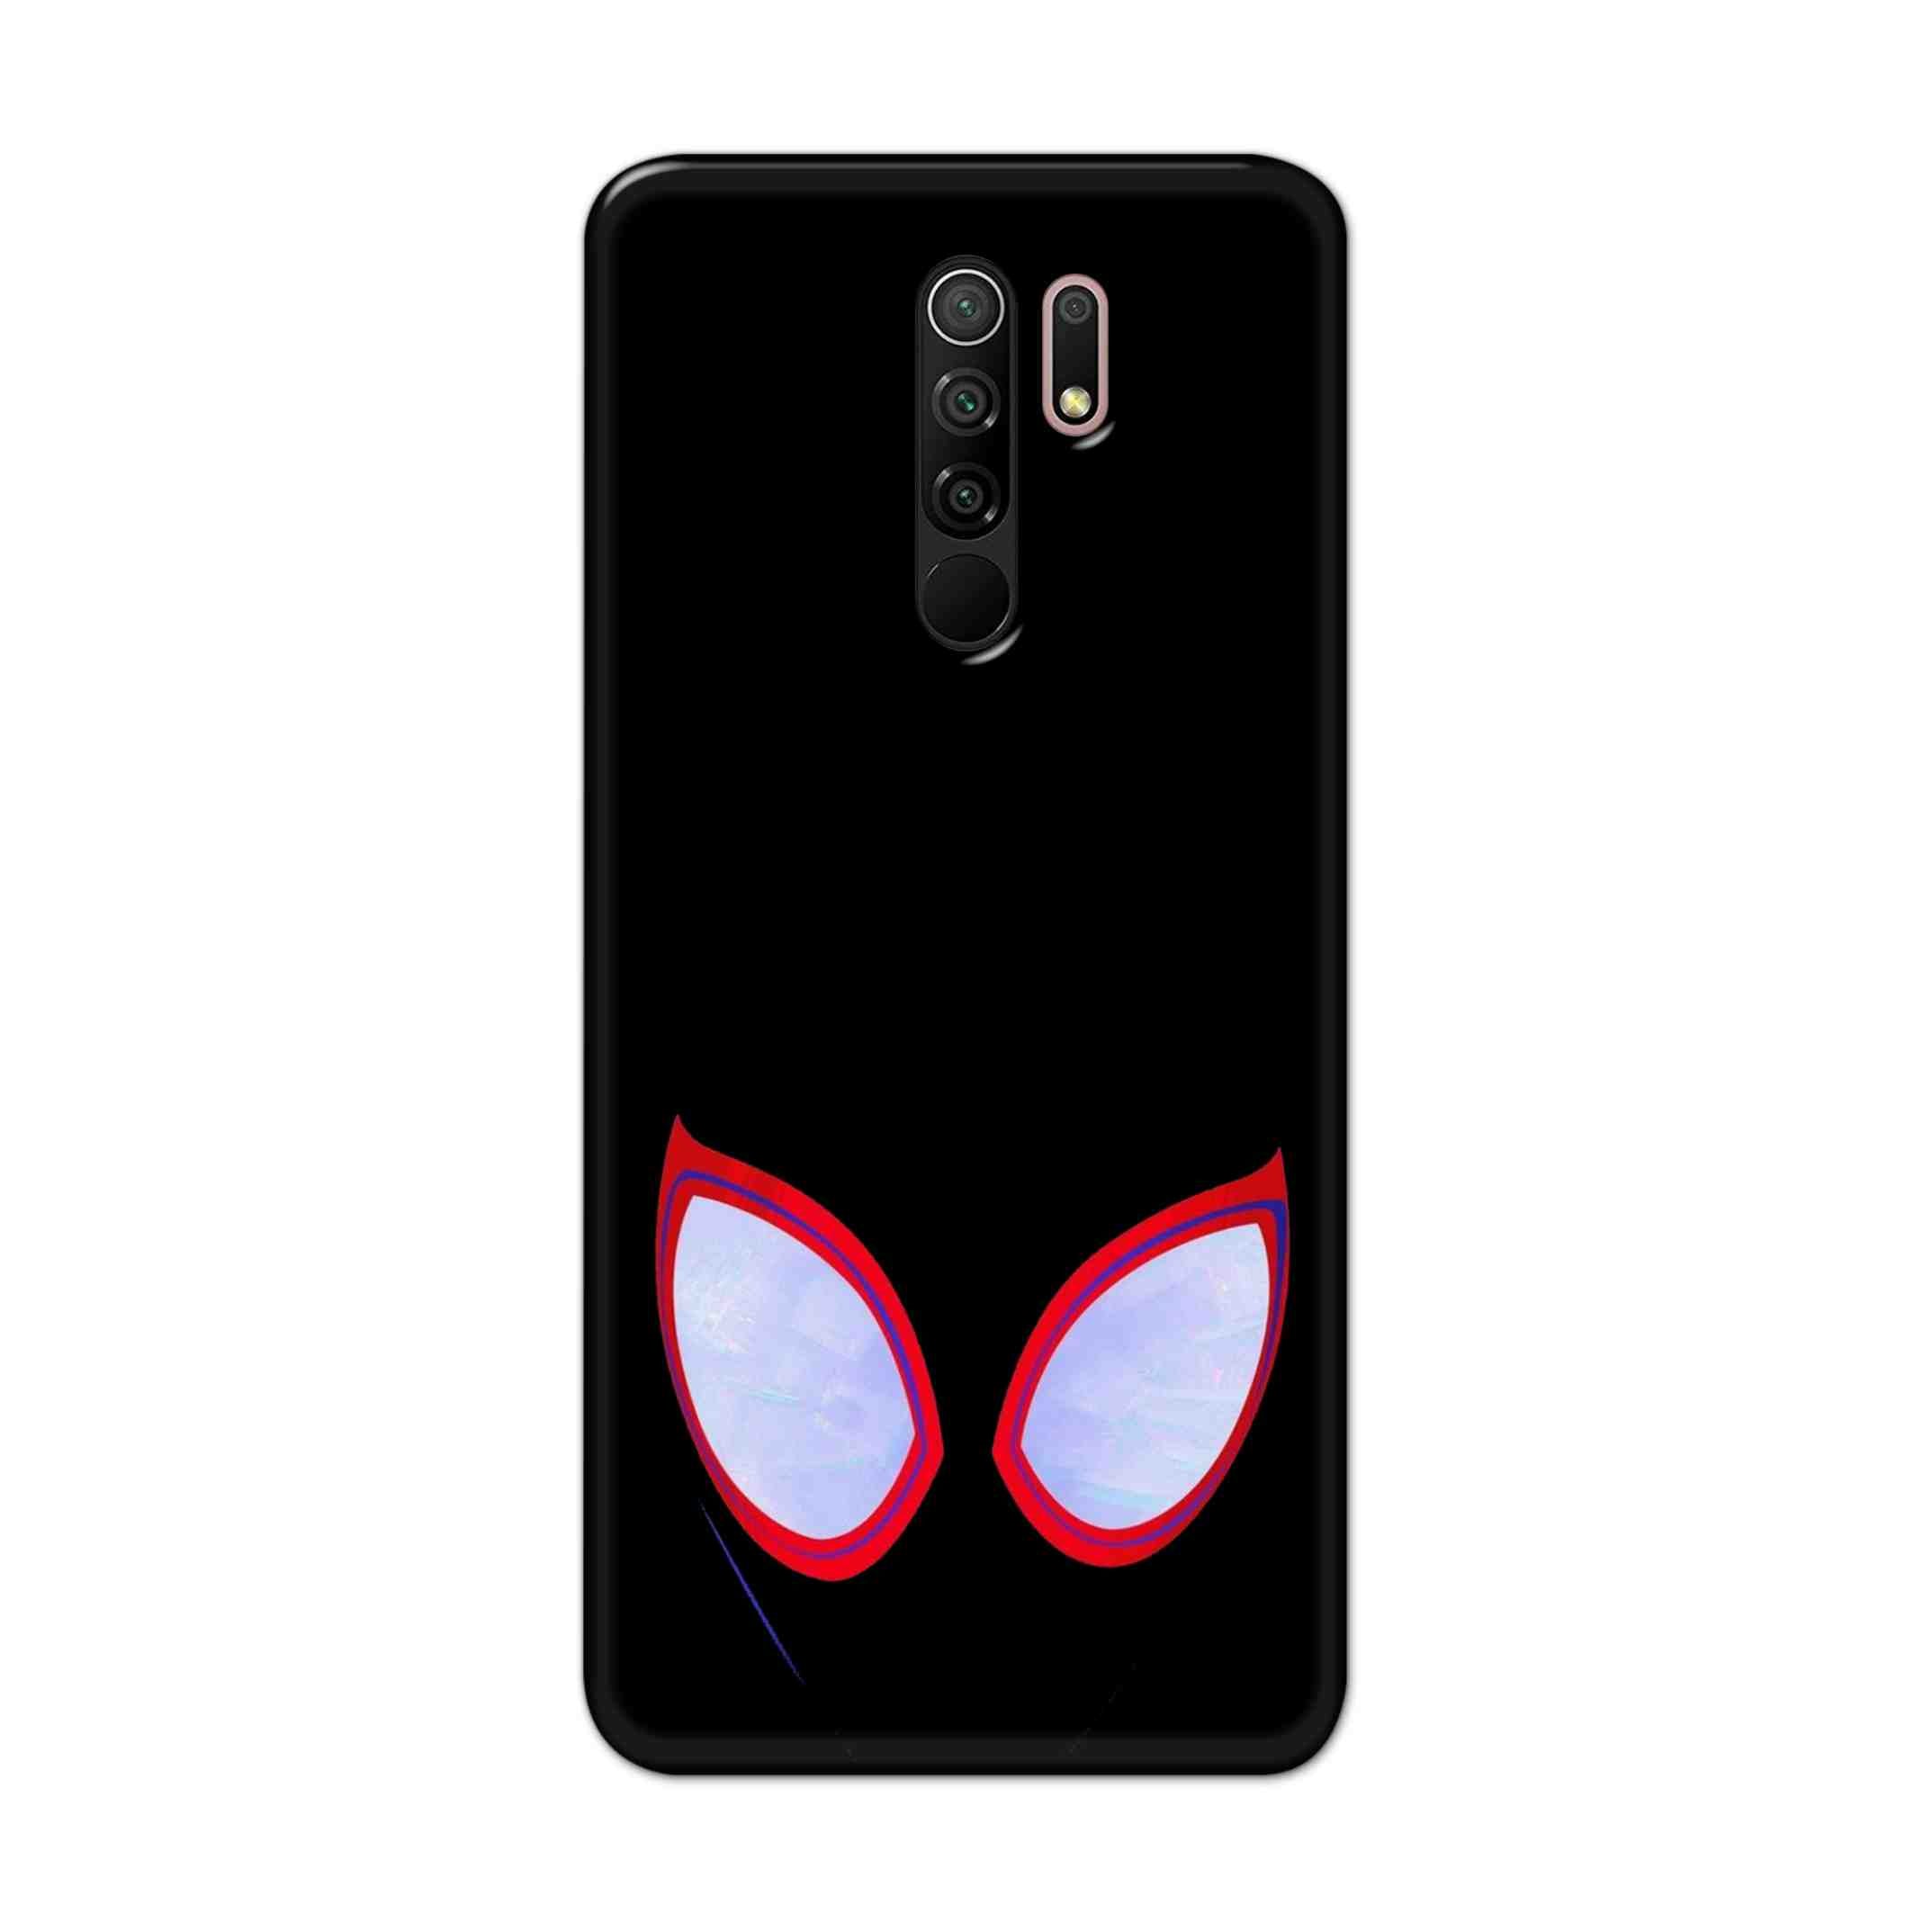 Buy Spiderman Eyes Hard Back Mobile Phone Case Cover For Xiaomi Redmi 9 Prime Online